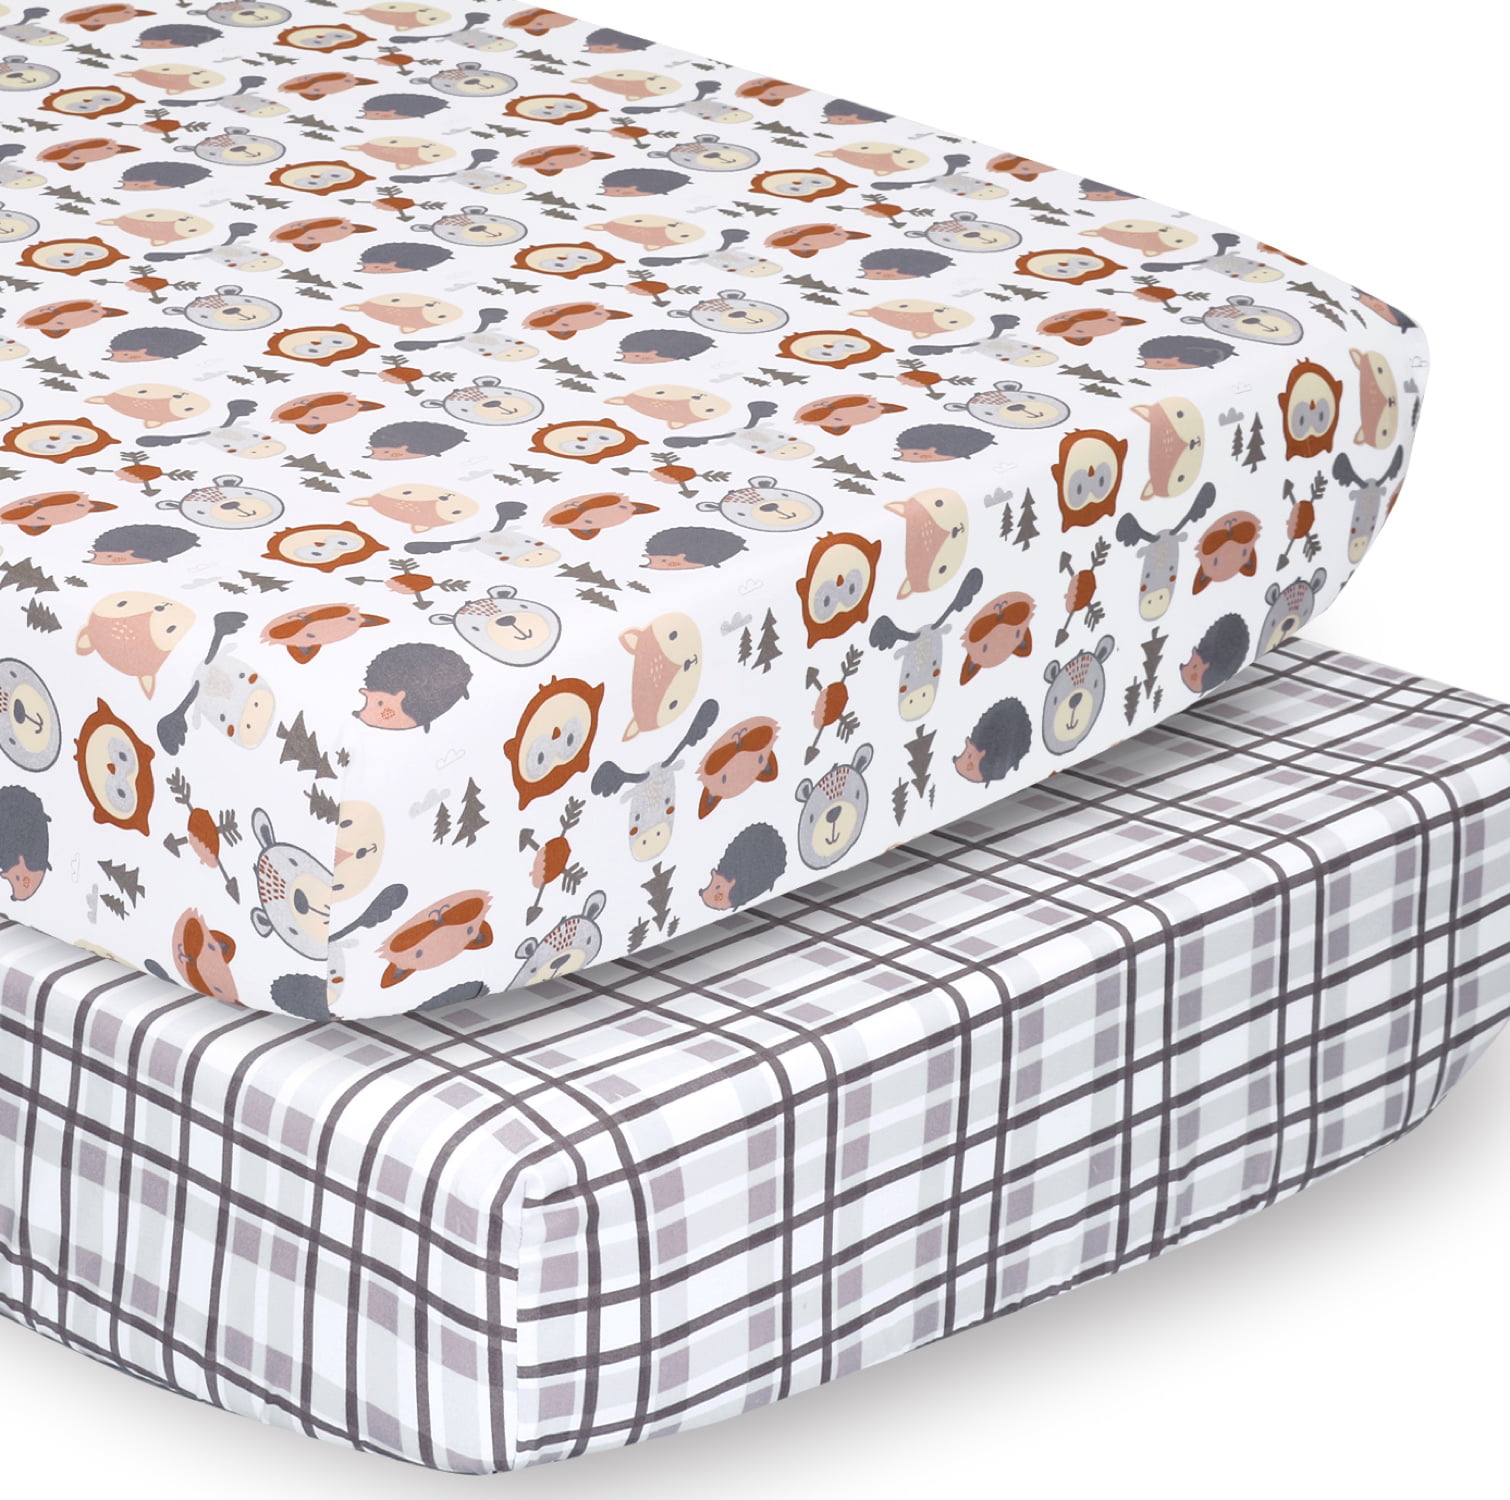 Fits Standard Crib Mattresses The Peanutshell Fitted Crib Sheet Set for Baby Boys or Girls 2 Pack Sheets in Plaid & Farm Themes 